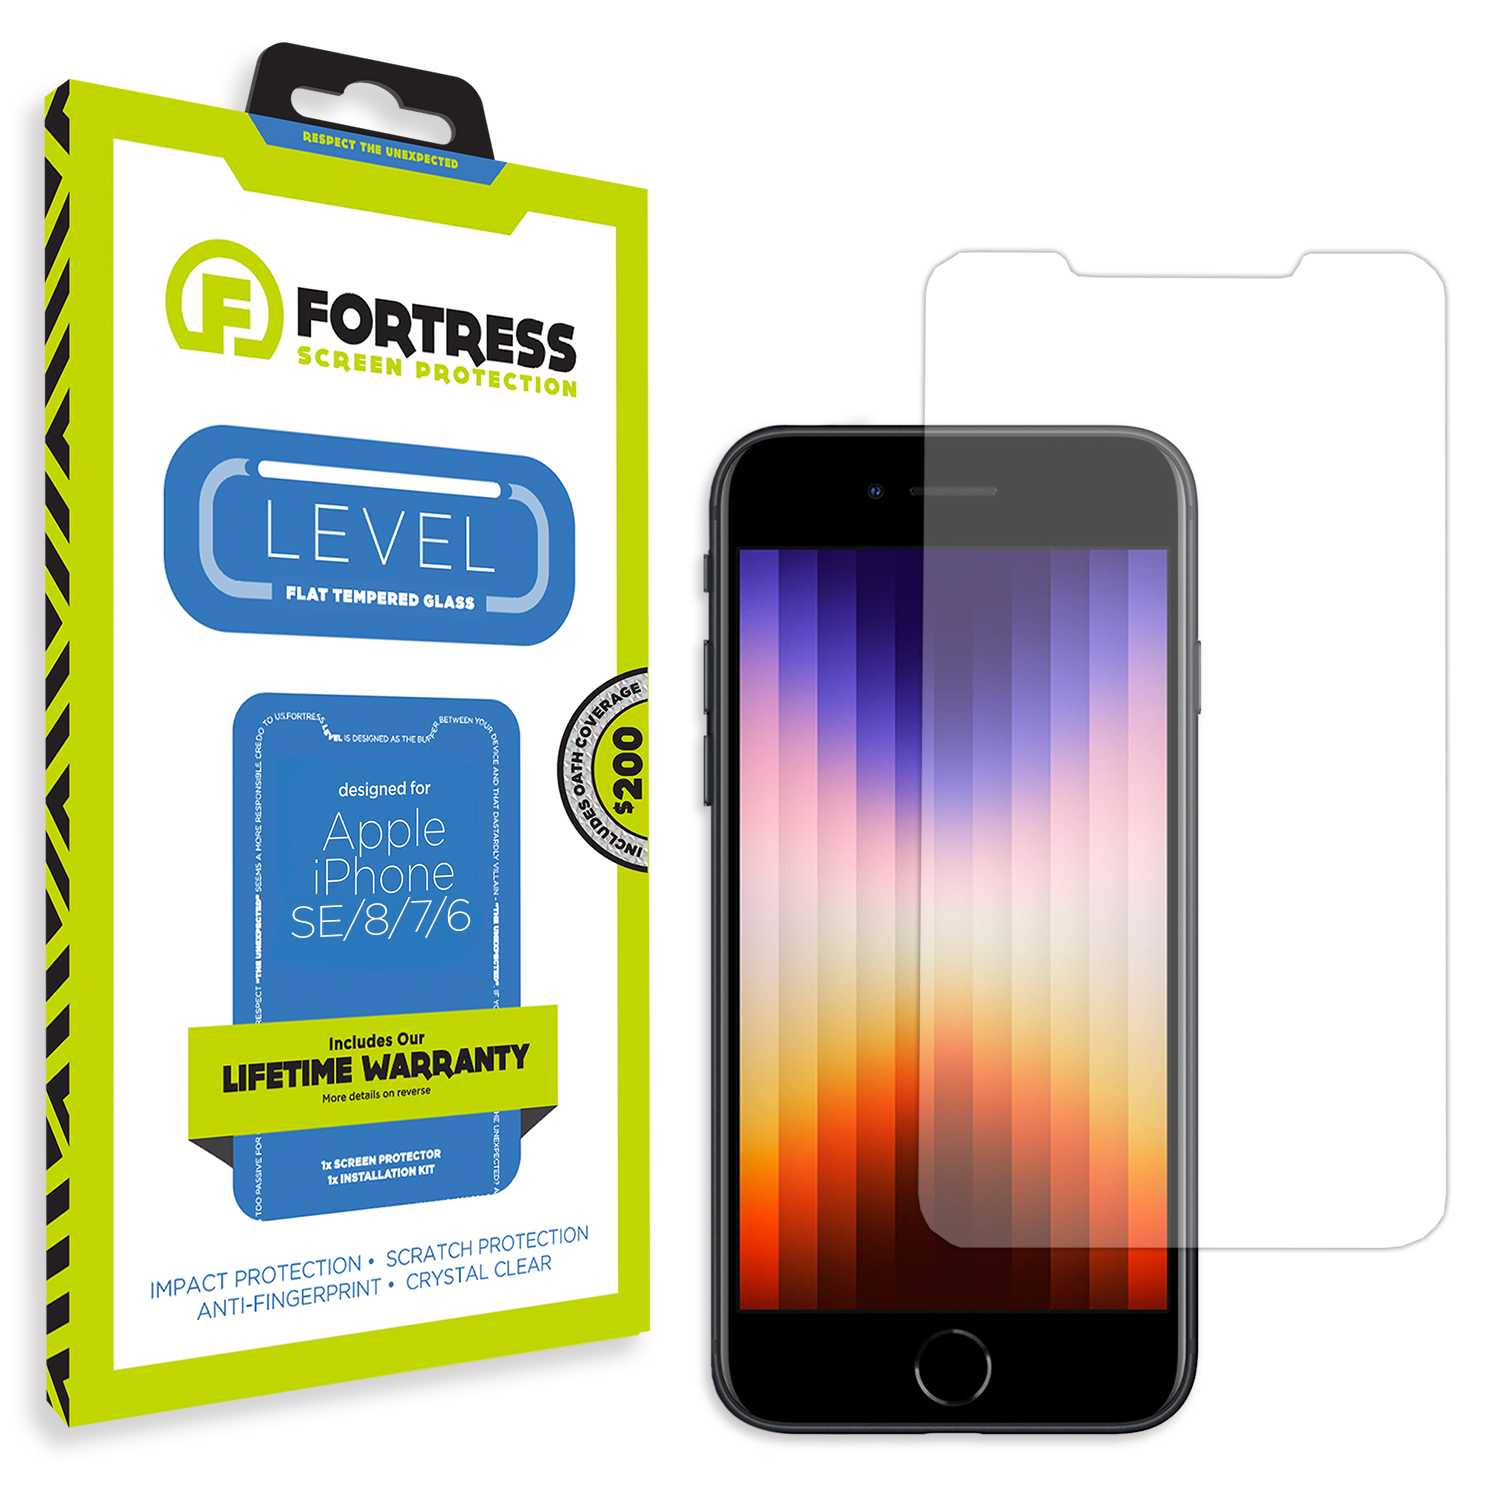 Fortress iPhone SE/8/7 Screen Protector $200Coverage Scooch Screen Protector